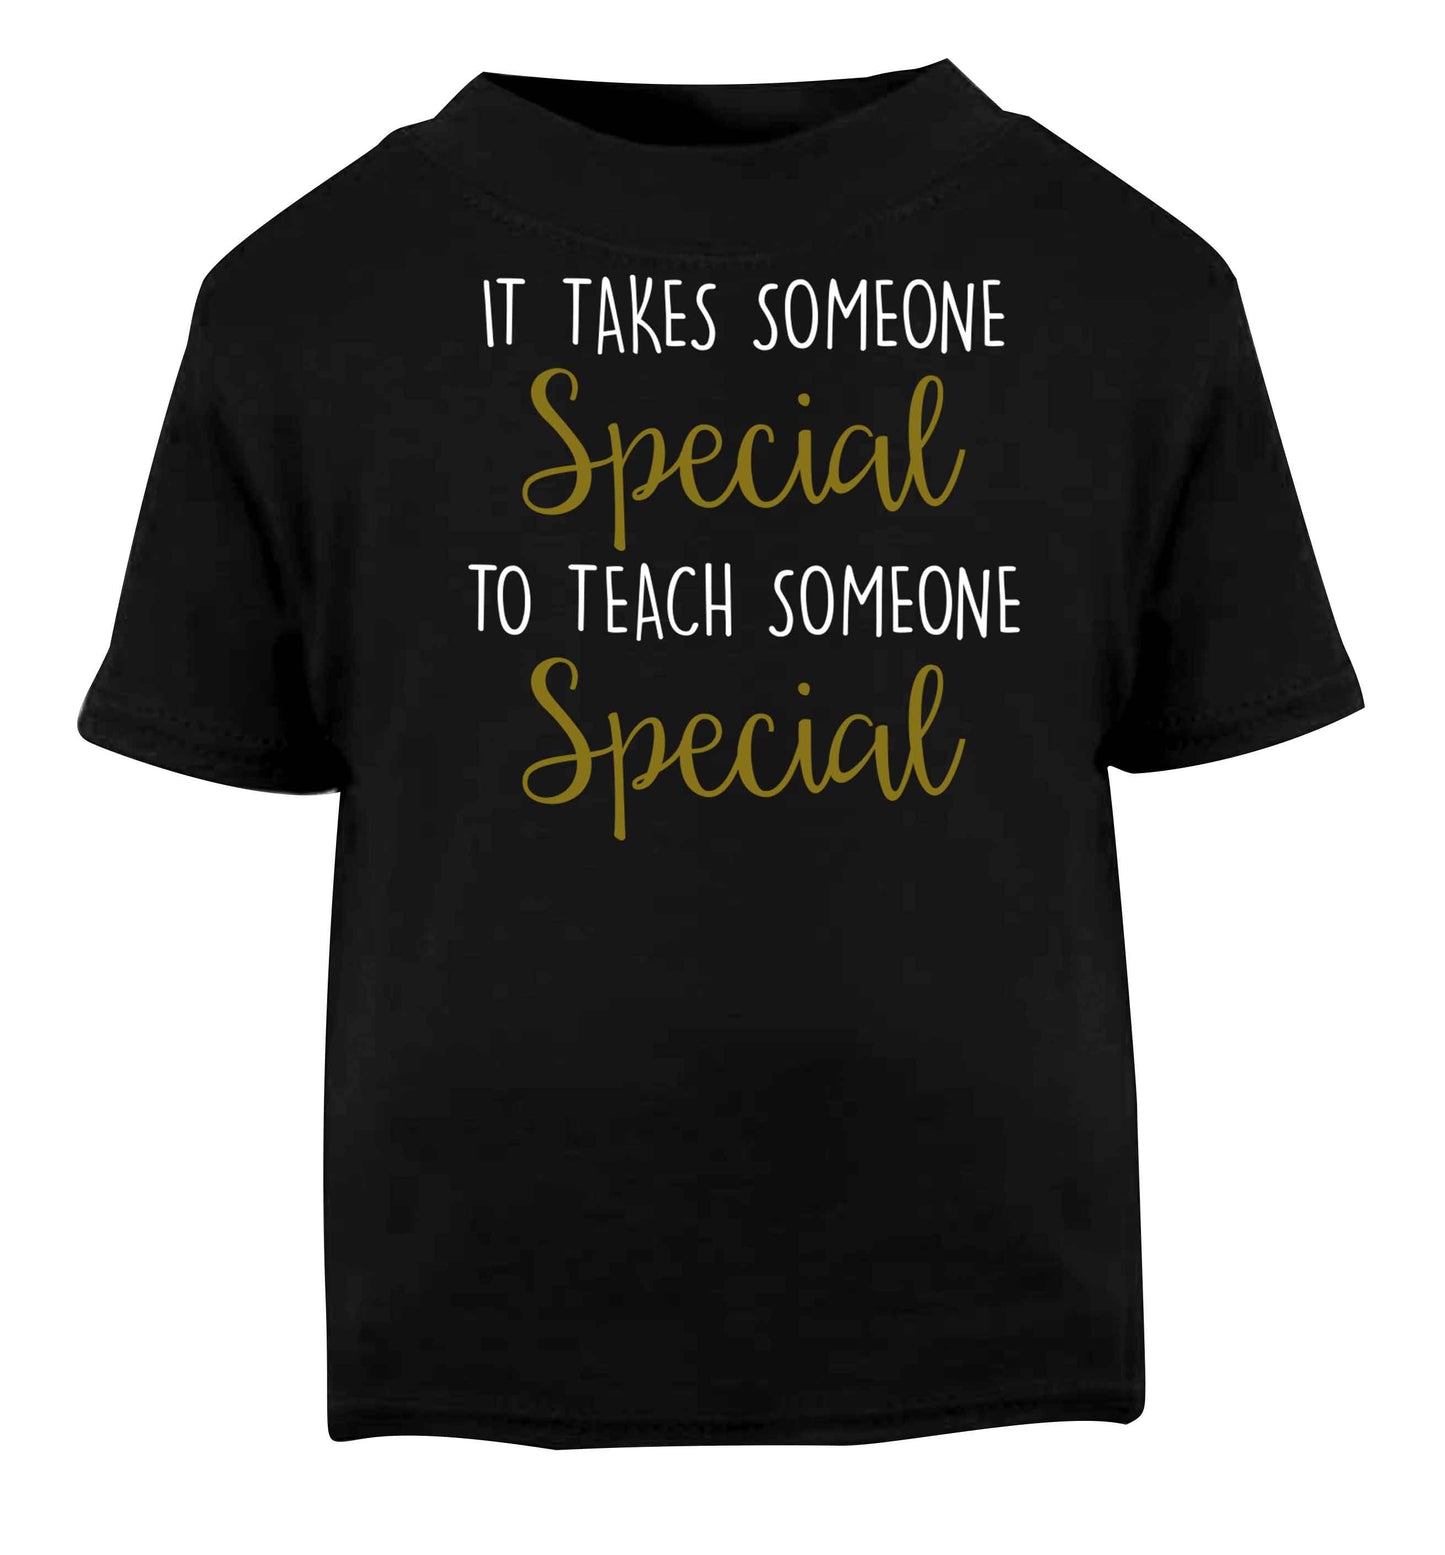 It takes someone special to teach someone special Black baby toddler Tshirt 2 years